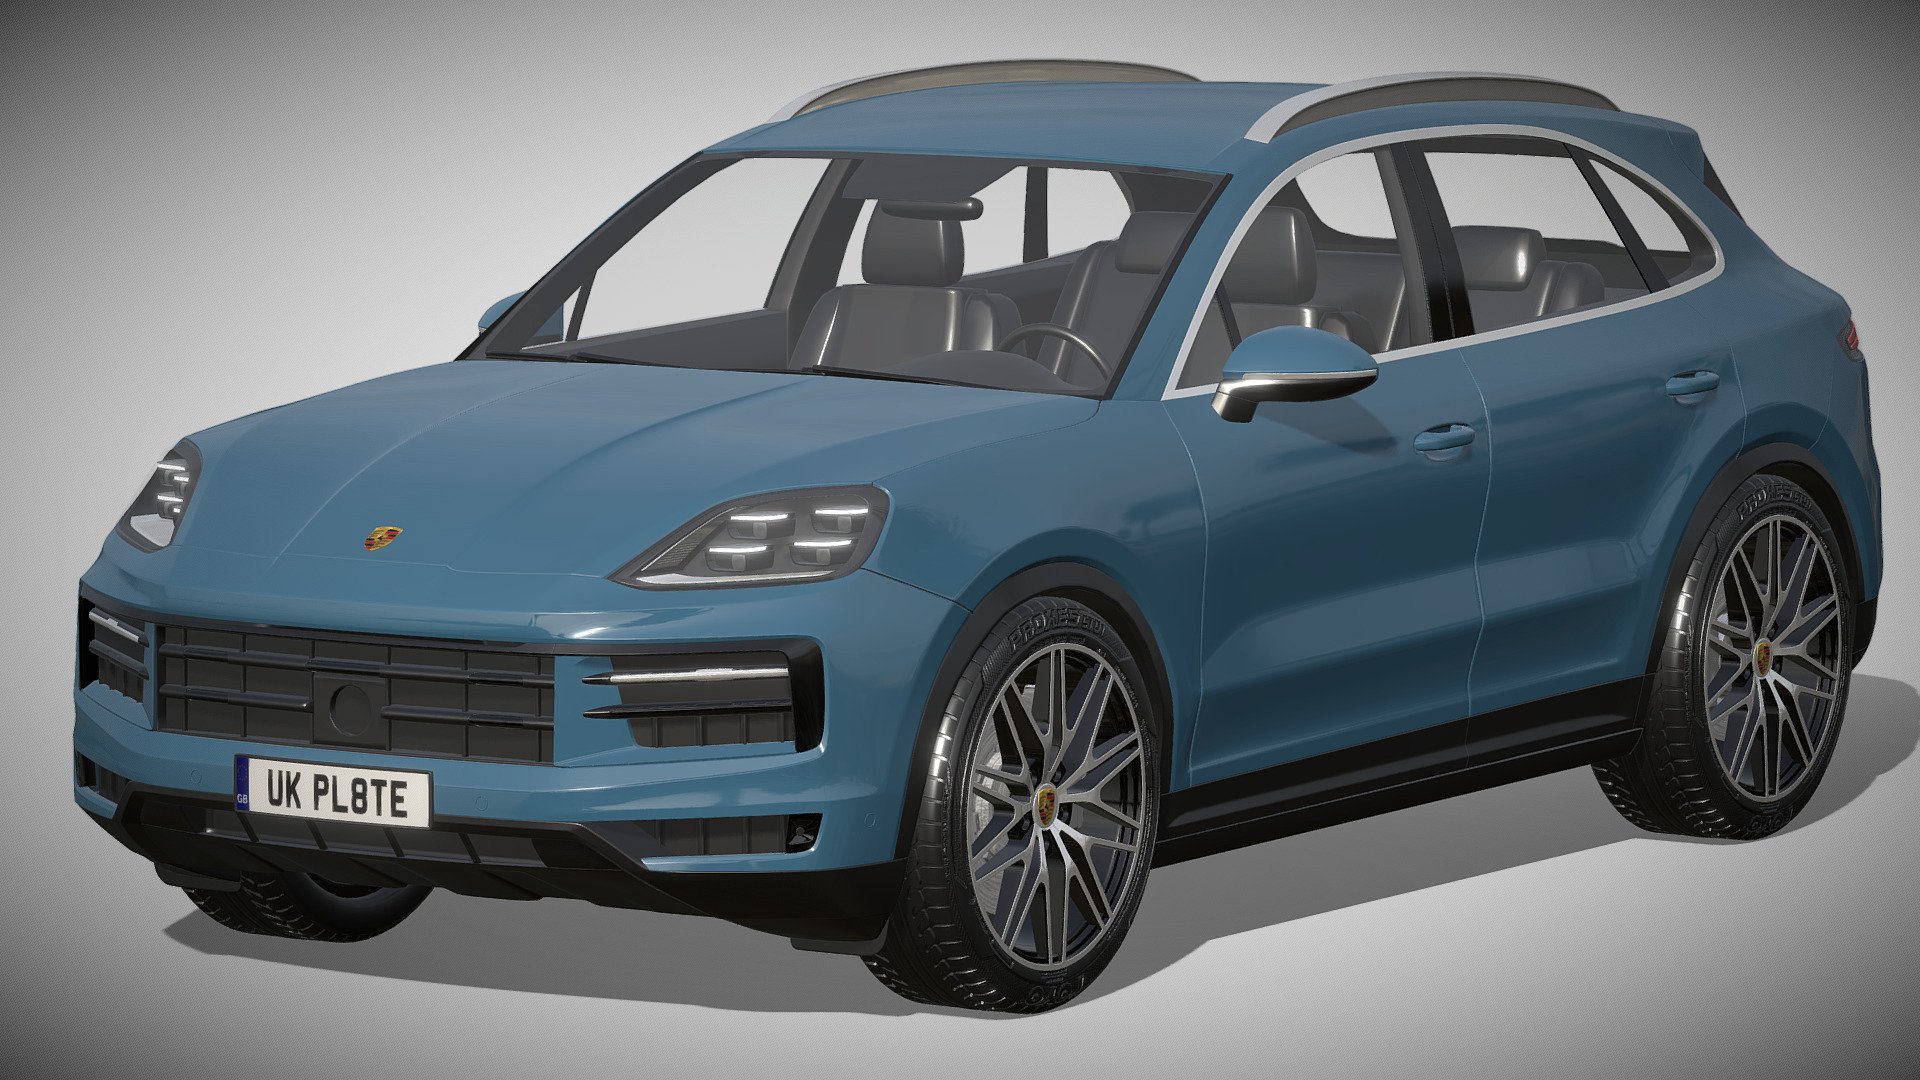 Porsche Cayenne 2024

https://www.porsche.com/usa/models/cayenne/cayenne-models/

Clean geometry Light weight model, yet completely detailed for HI-Res renders. Use for movies, Advertisements or games

Corona render and materials

All textures include in *.rar files

Lighting setup is not included in the file! - Porsche Cayenne 2024 - Buy Royalty Free 3D model by zifir3d 3d model